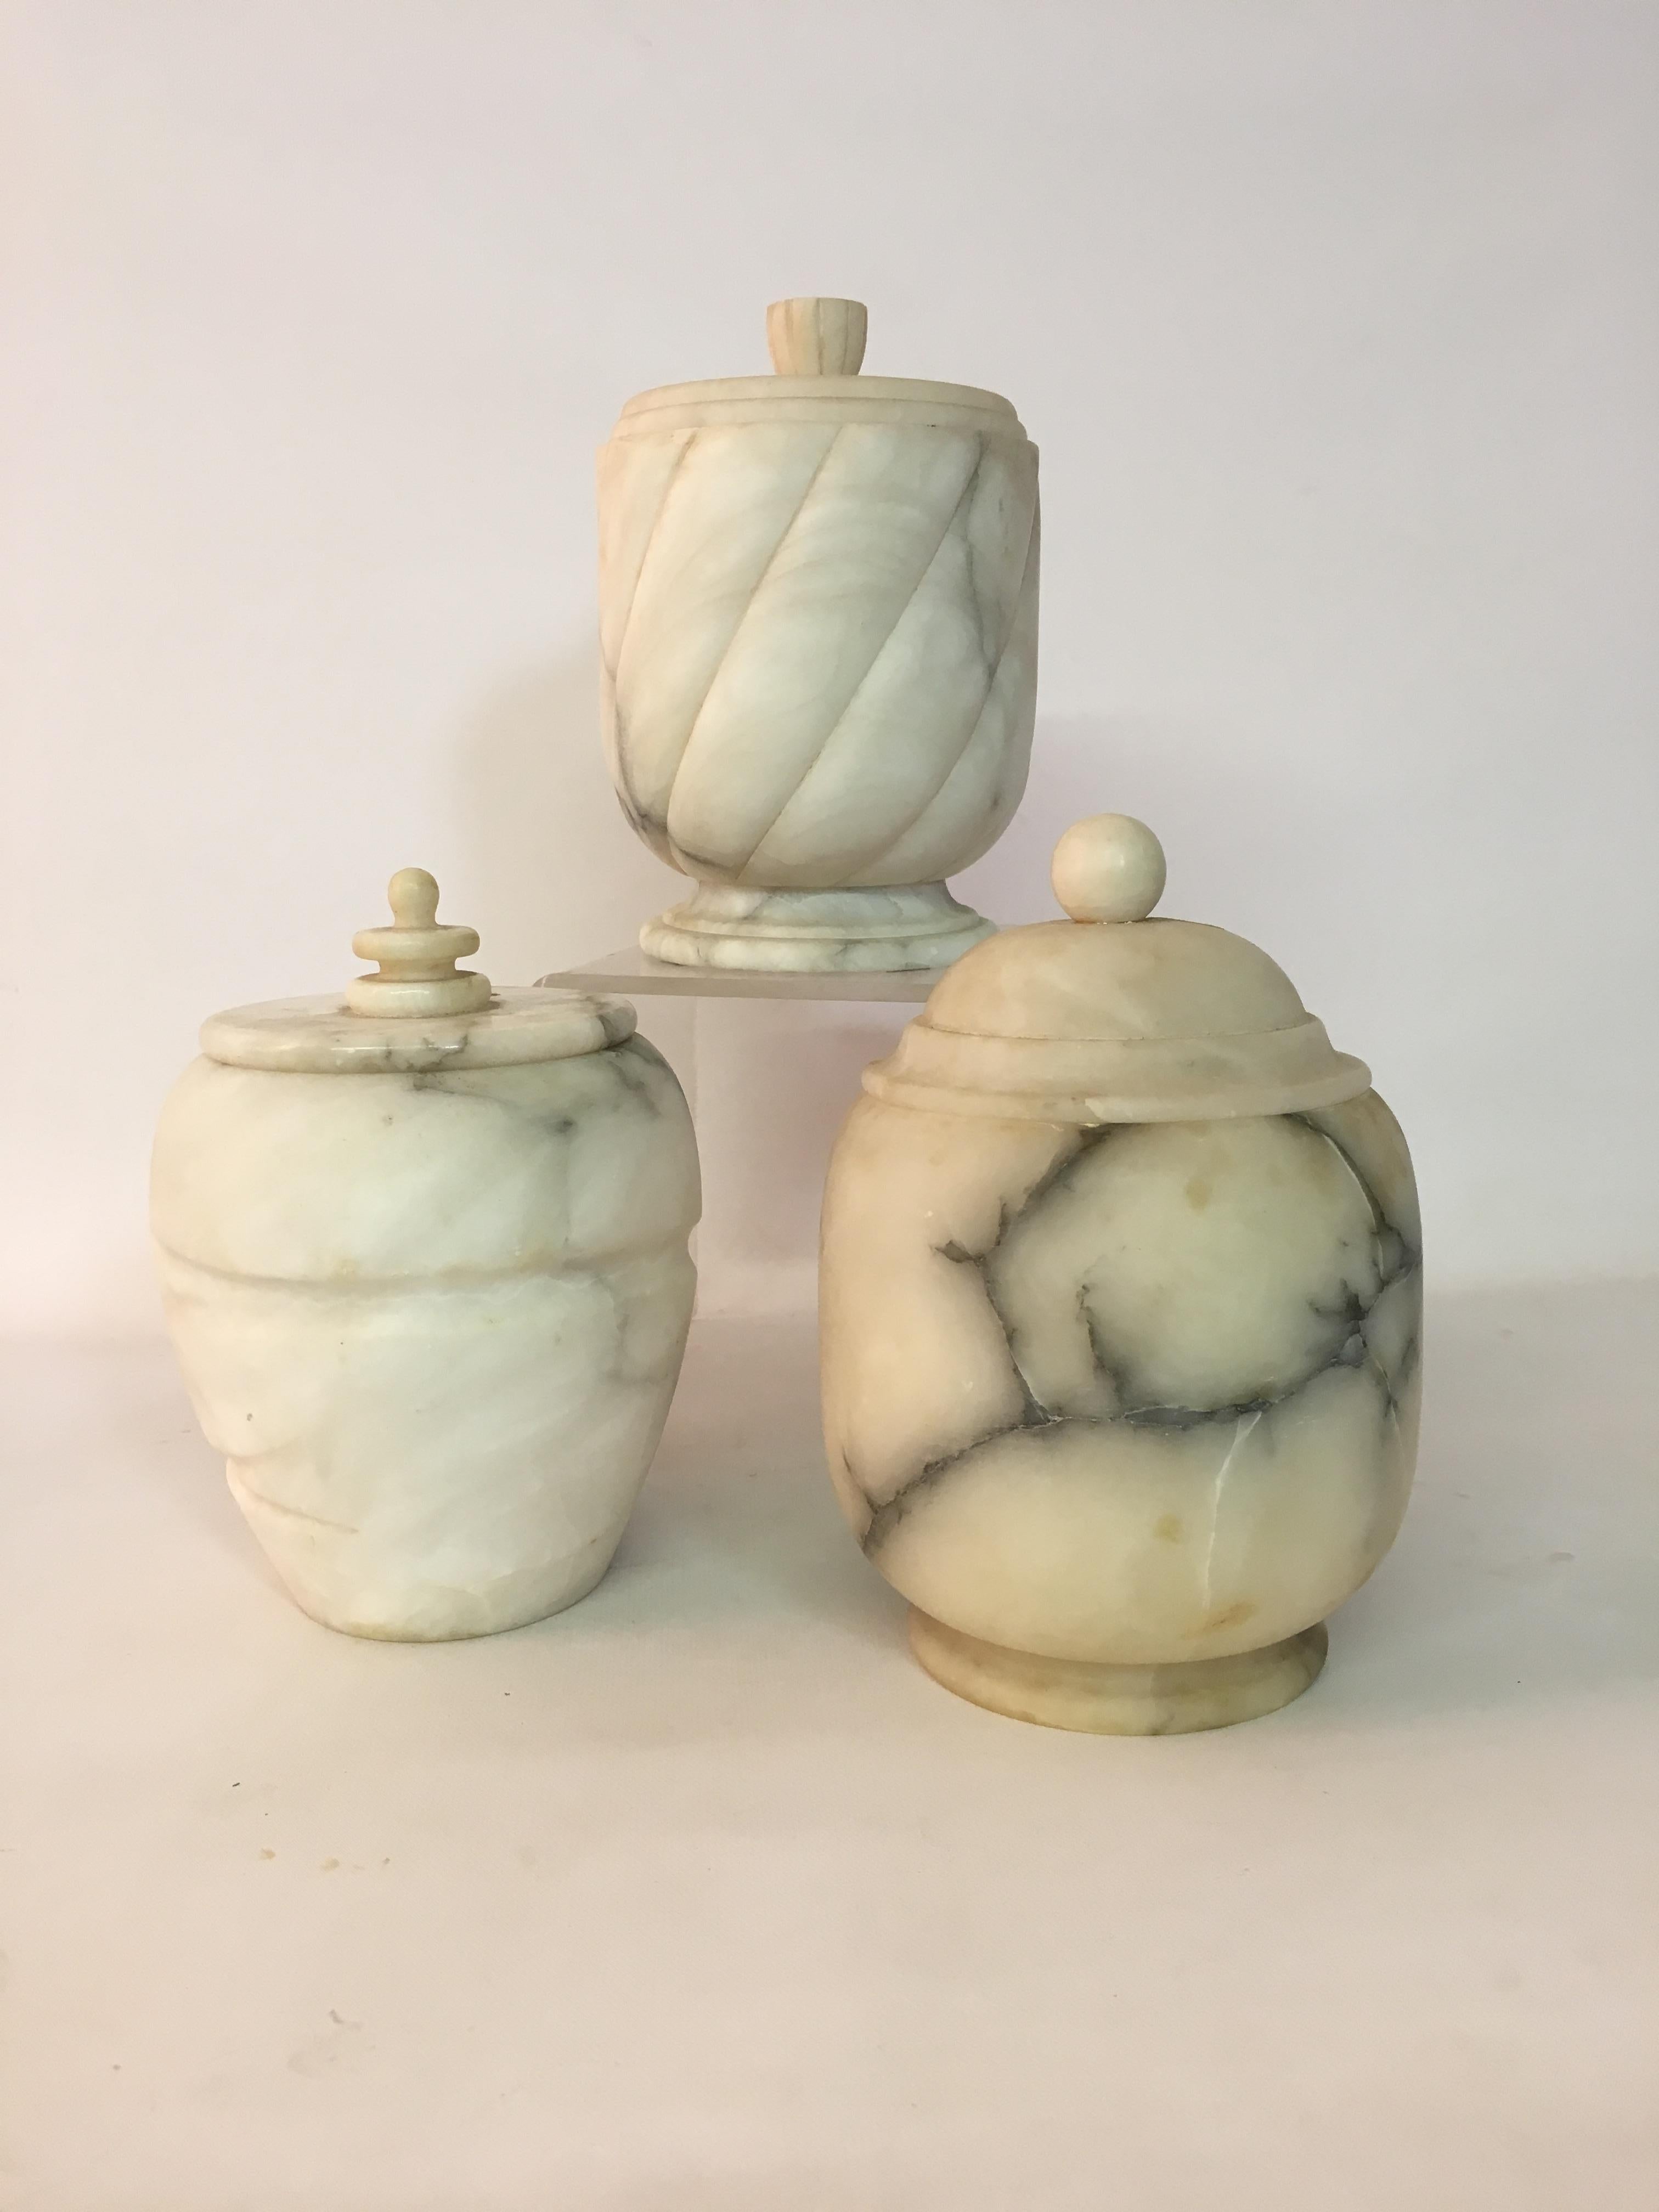 Three uniquely carved white Carrara, Italian marble canisters with gray/black veining. Purchased in the 1950s and lovingly cared for and admired. Wonderful storage.

The dimensions range from 7.75